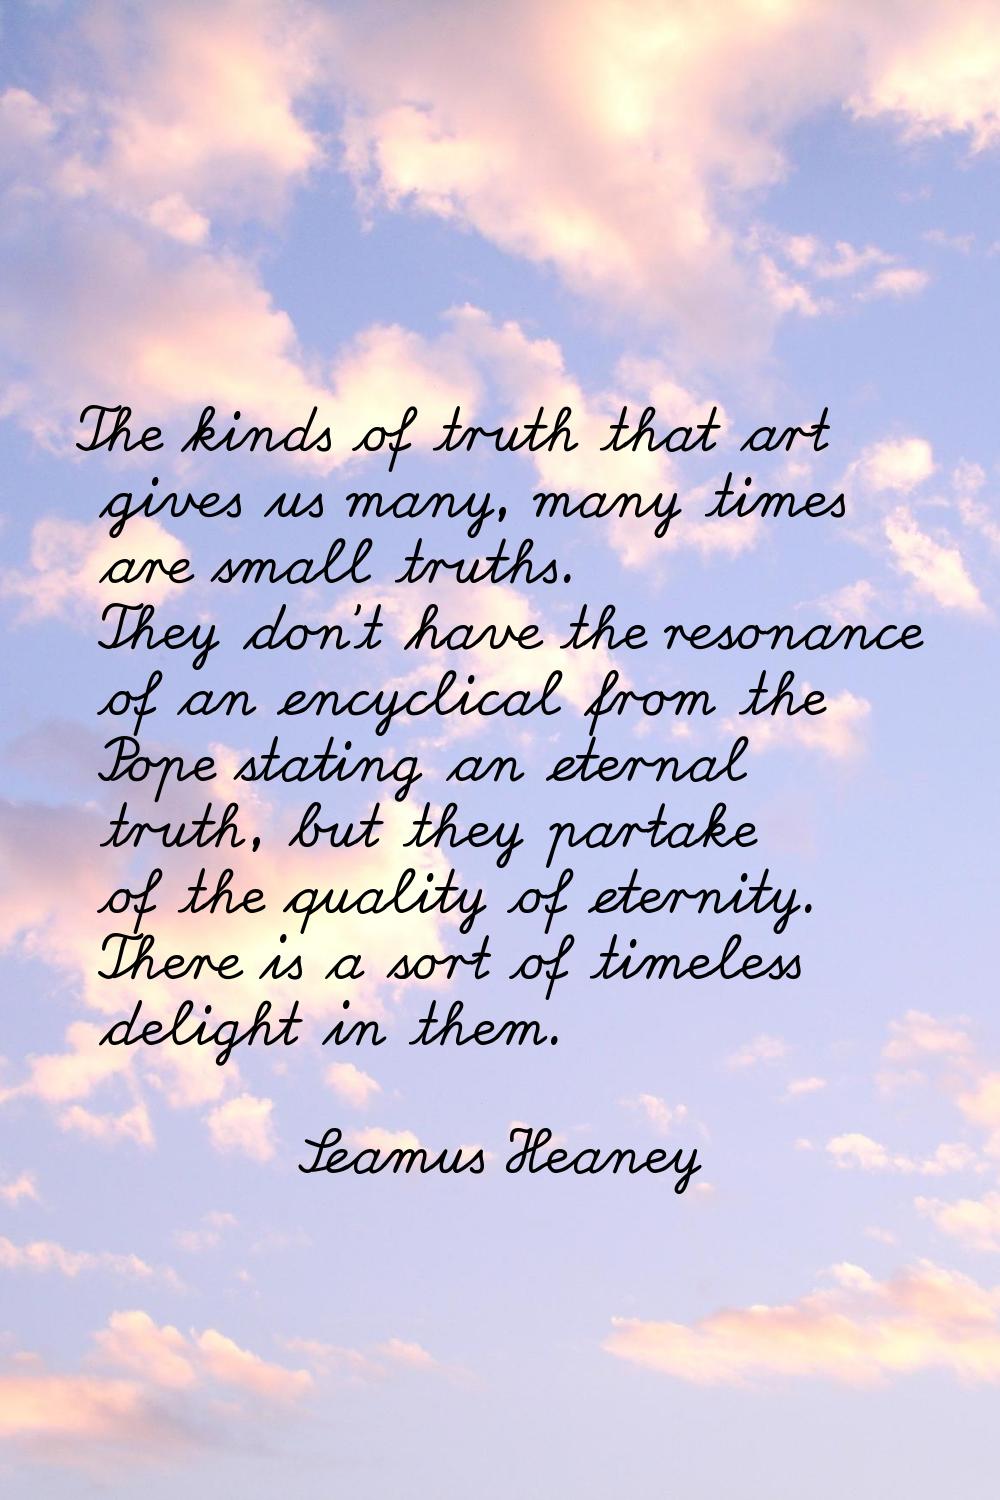 The kinds of truth that art gives us many, many times are small truths. They don't have the resonan